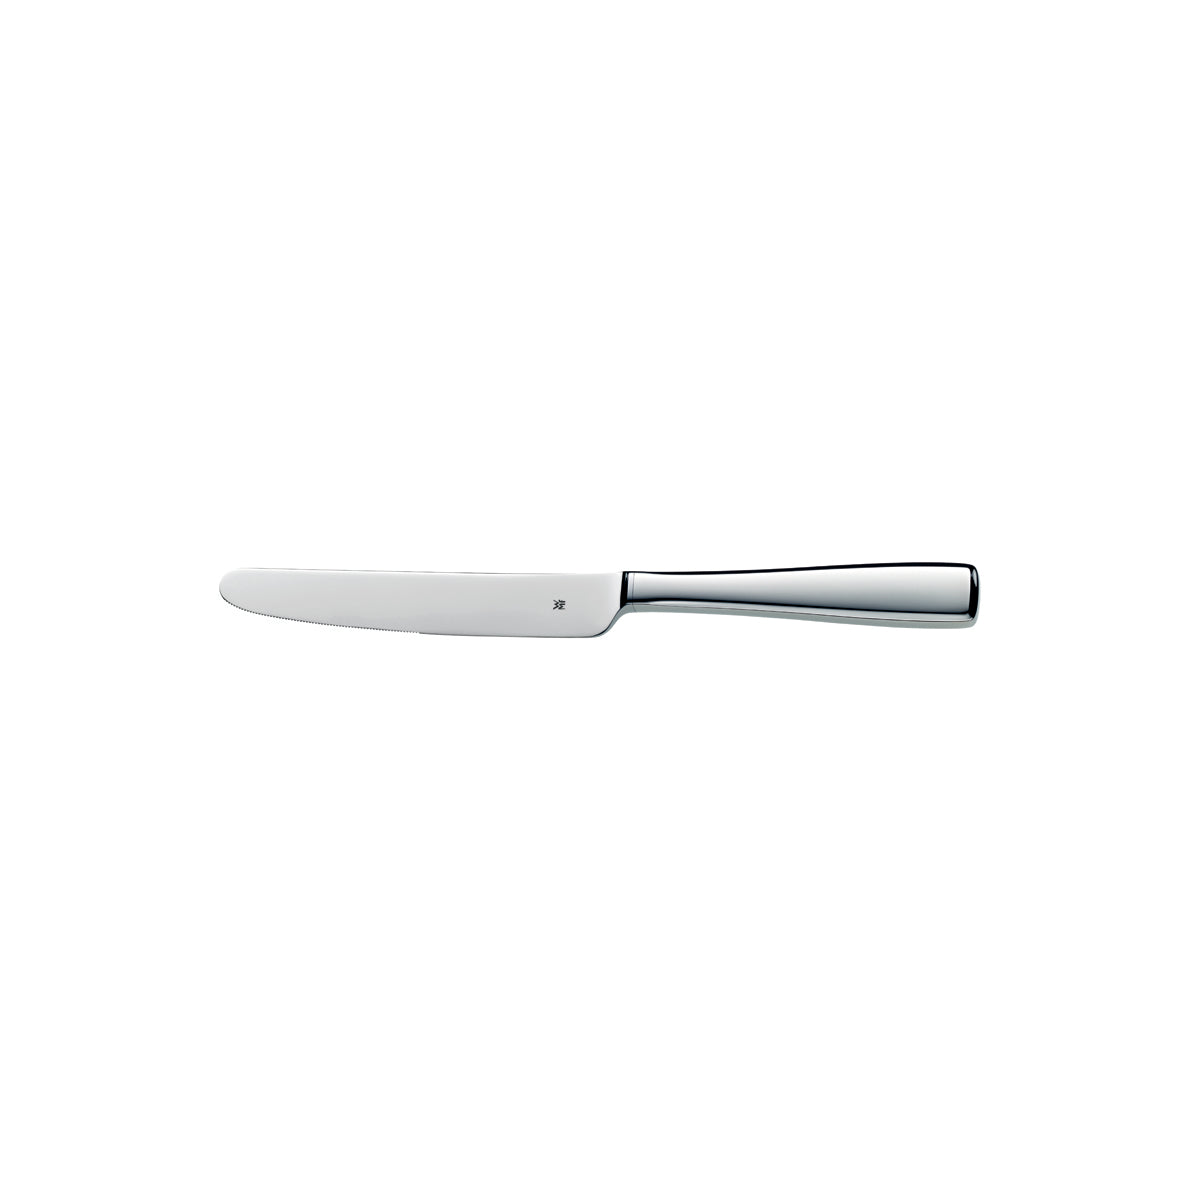 12.7903.6047 WMF Solid Table Knife - Hollow Handle Stainless Steel Tomkin Australia Hospitality Supplies